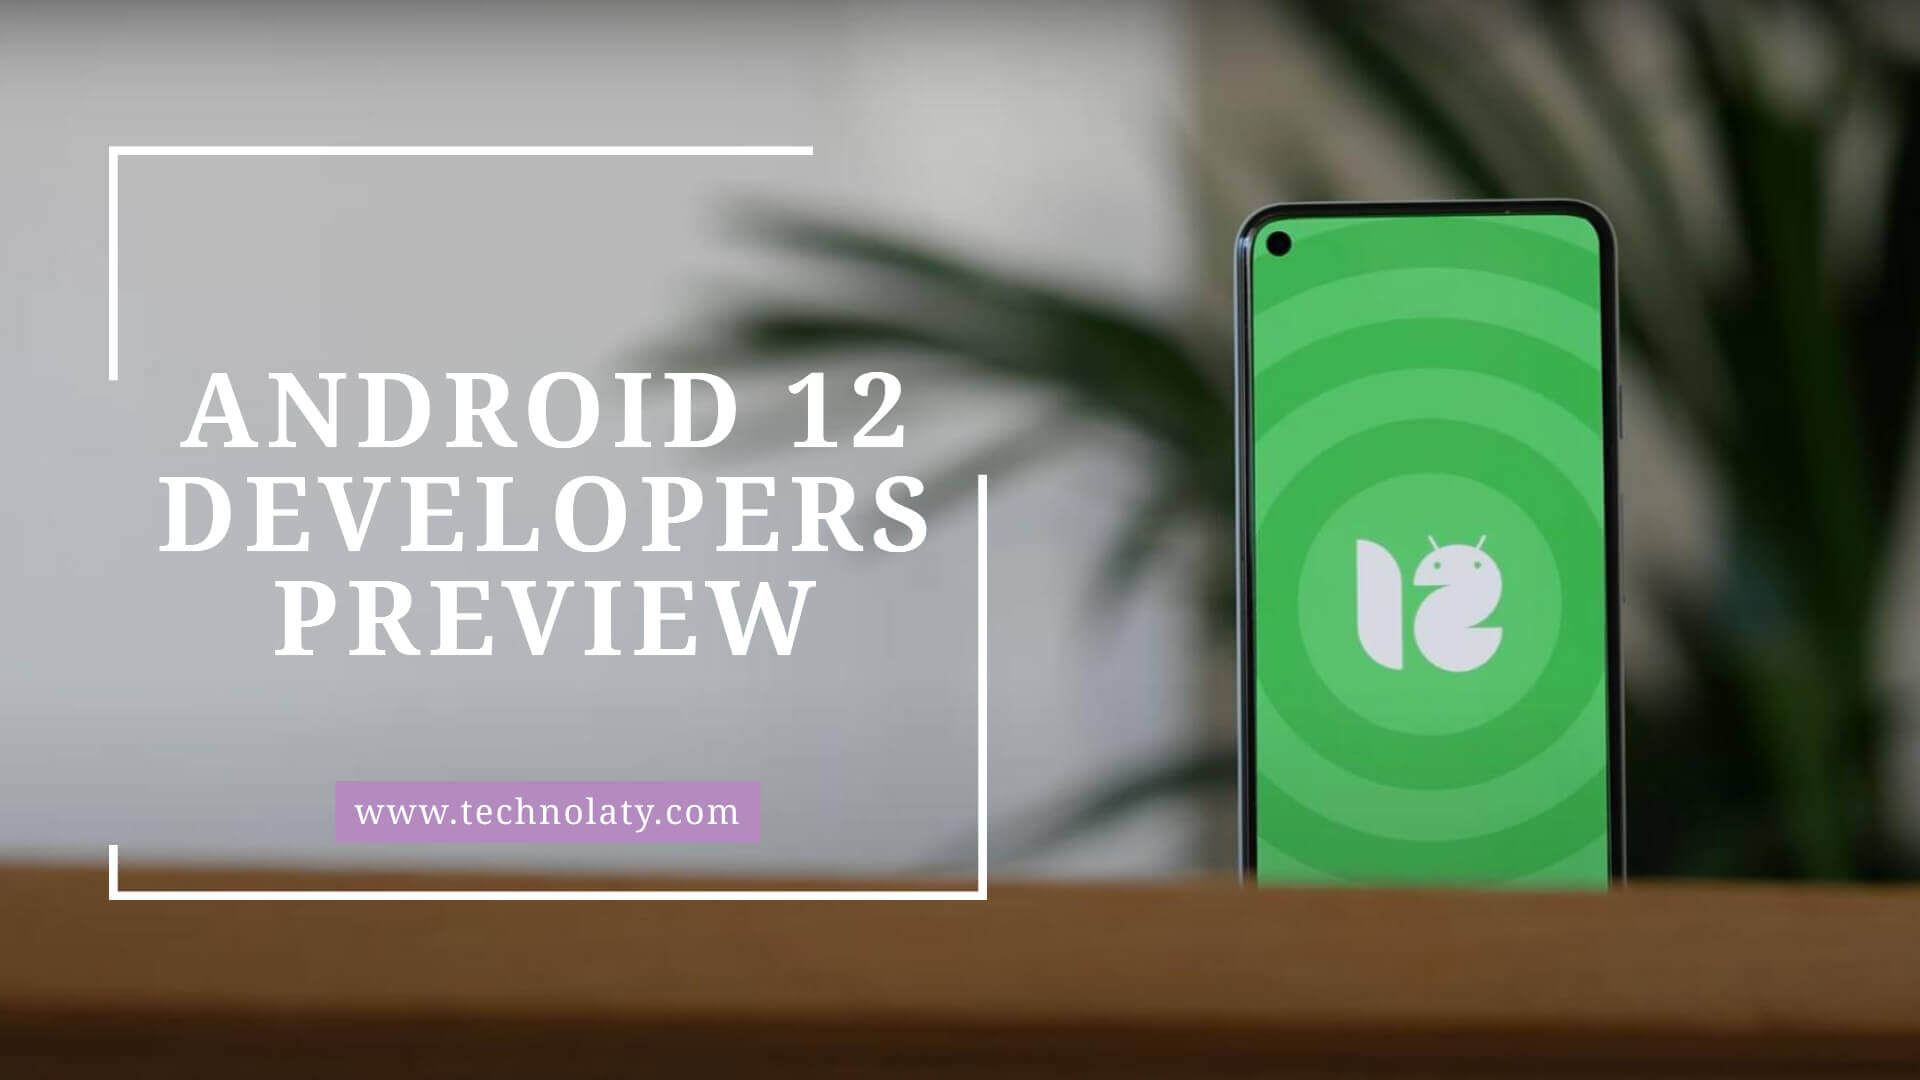 Android 12 Developers Preview Image